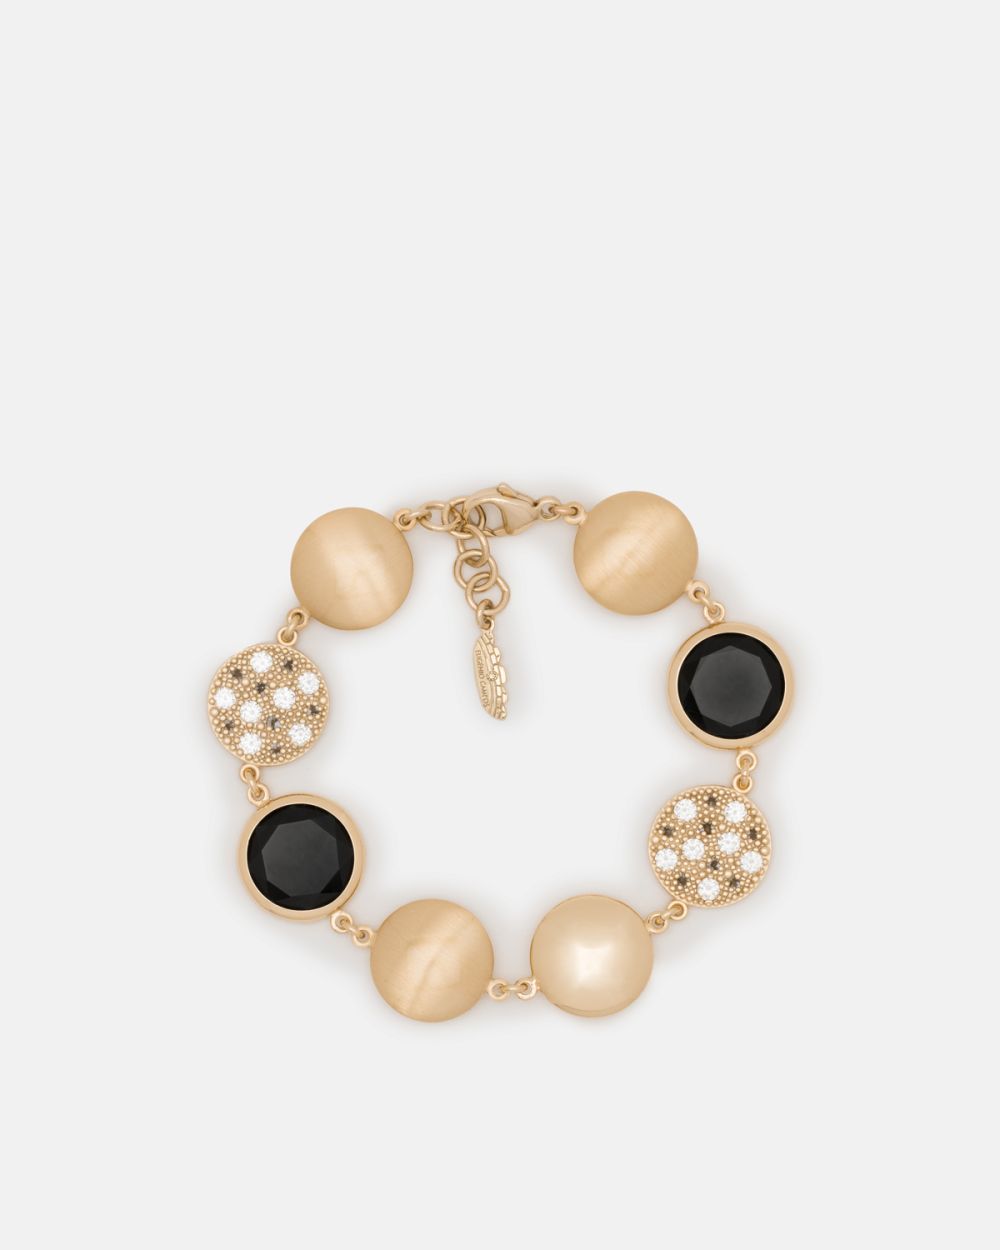 Superb Black Bracelet in Gold Plated Silver with Zirconias